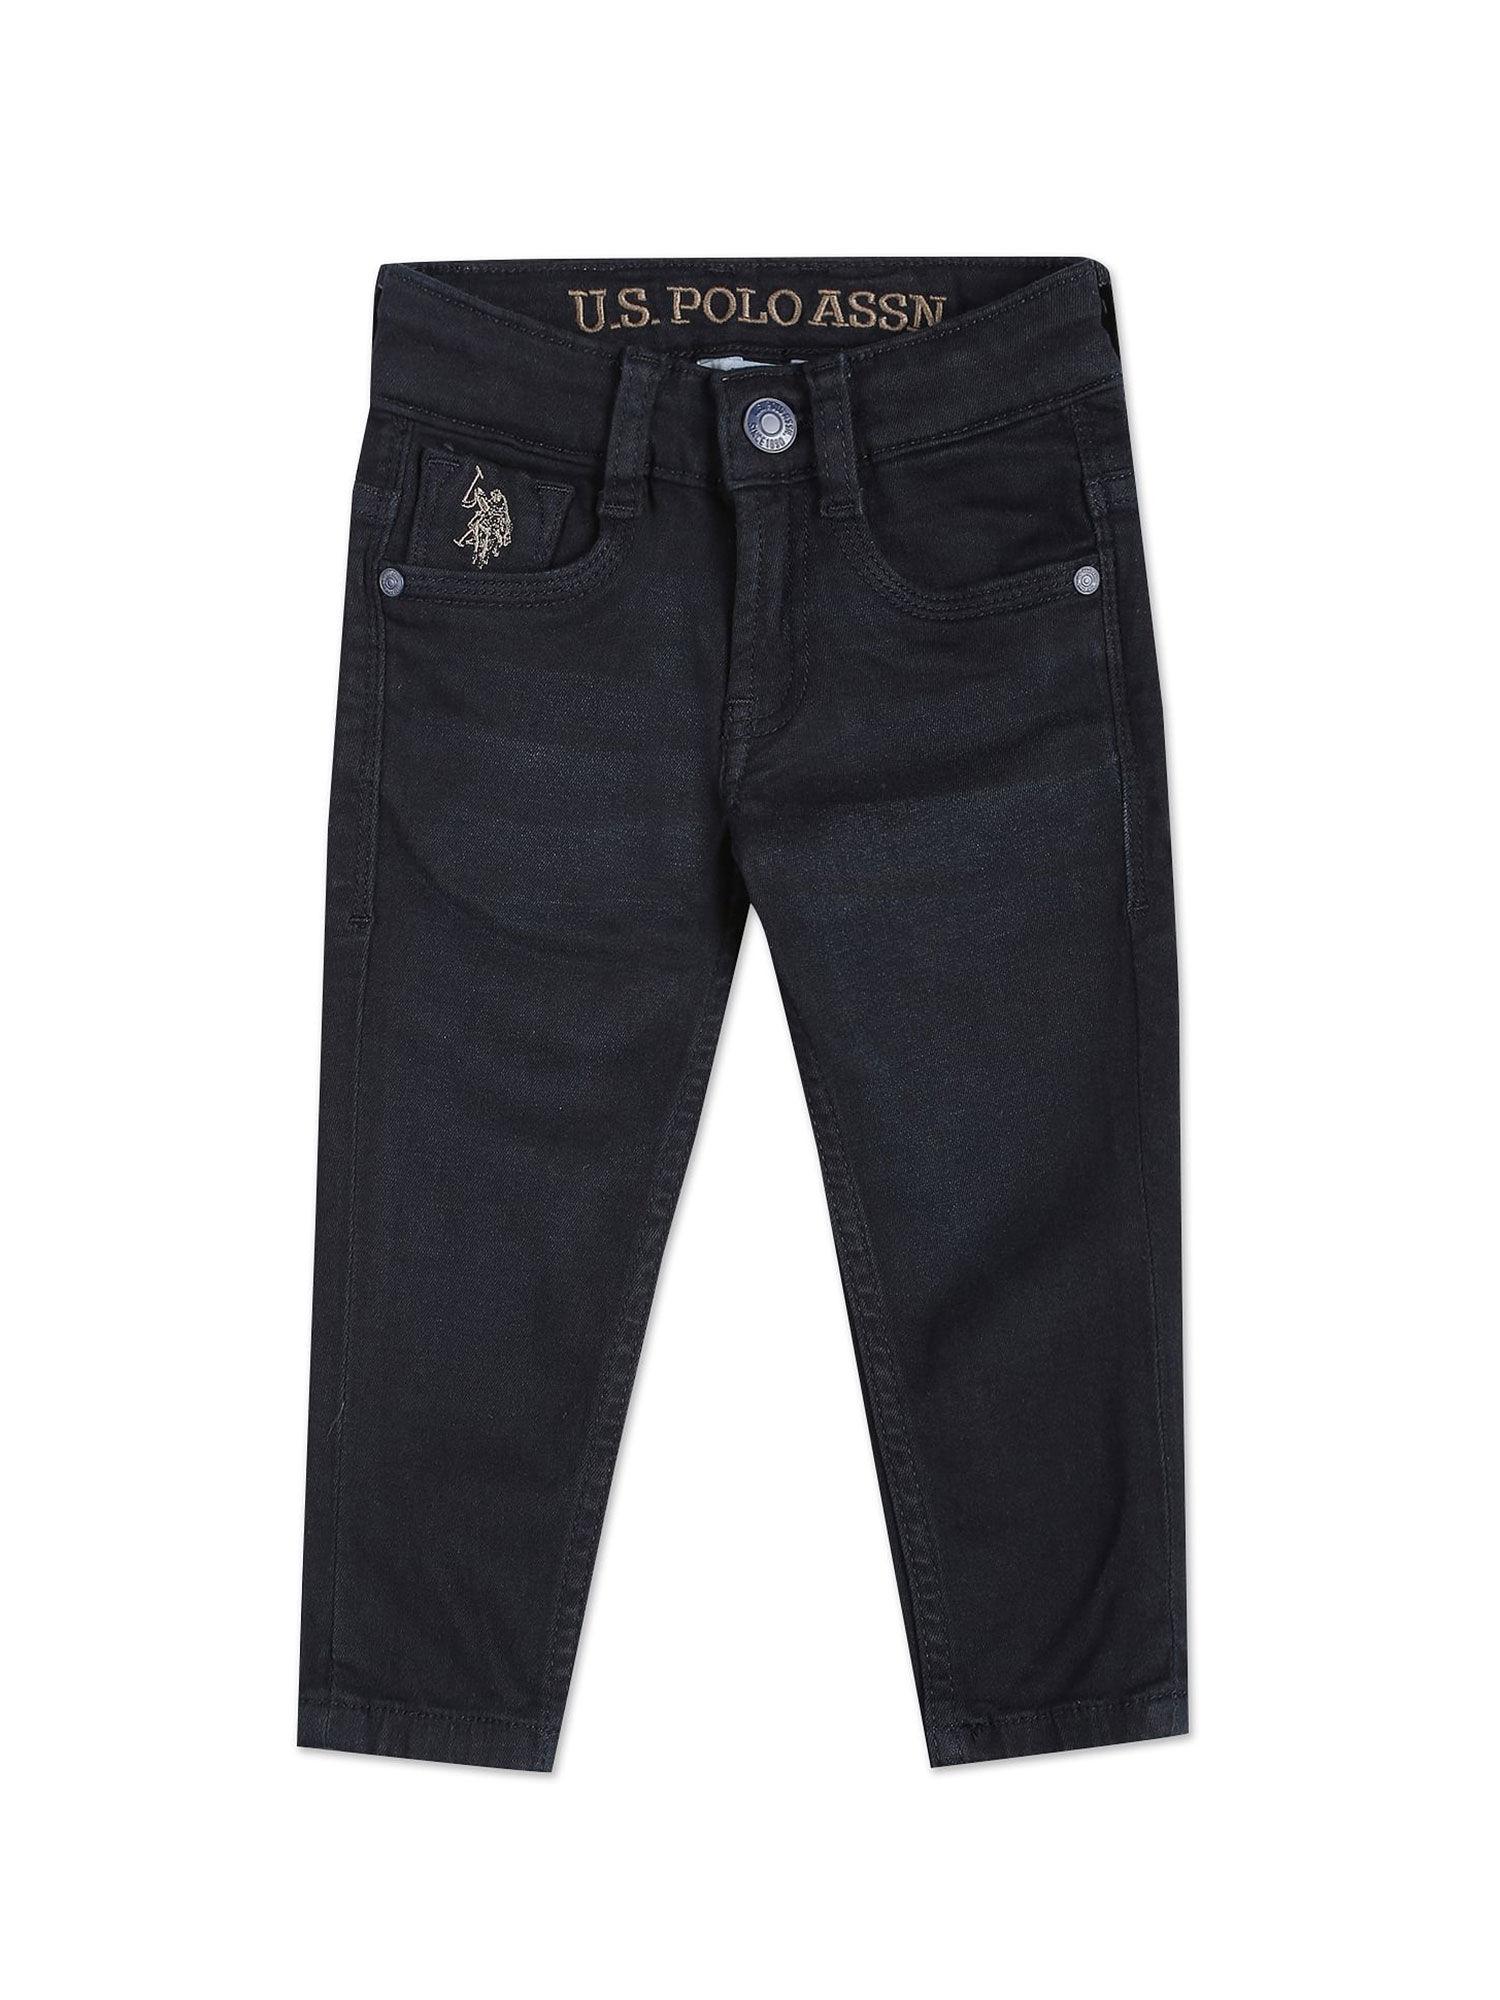 Skinny Fit Authentic 1890 Jeans Black